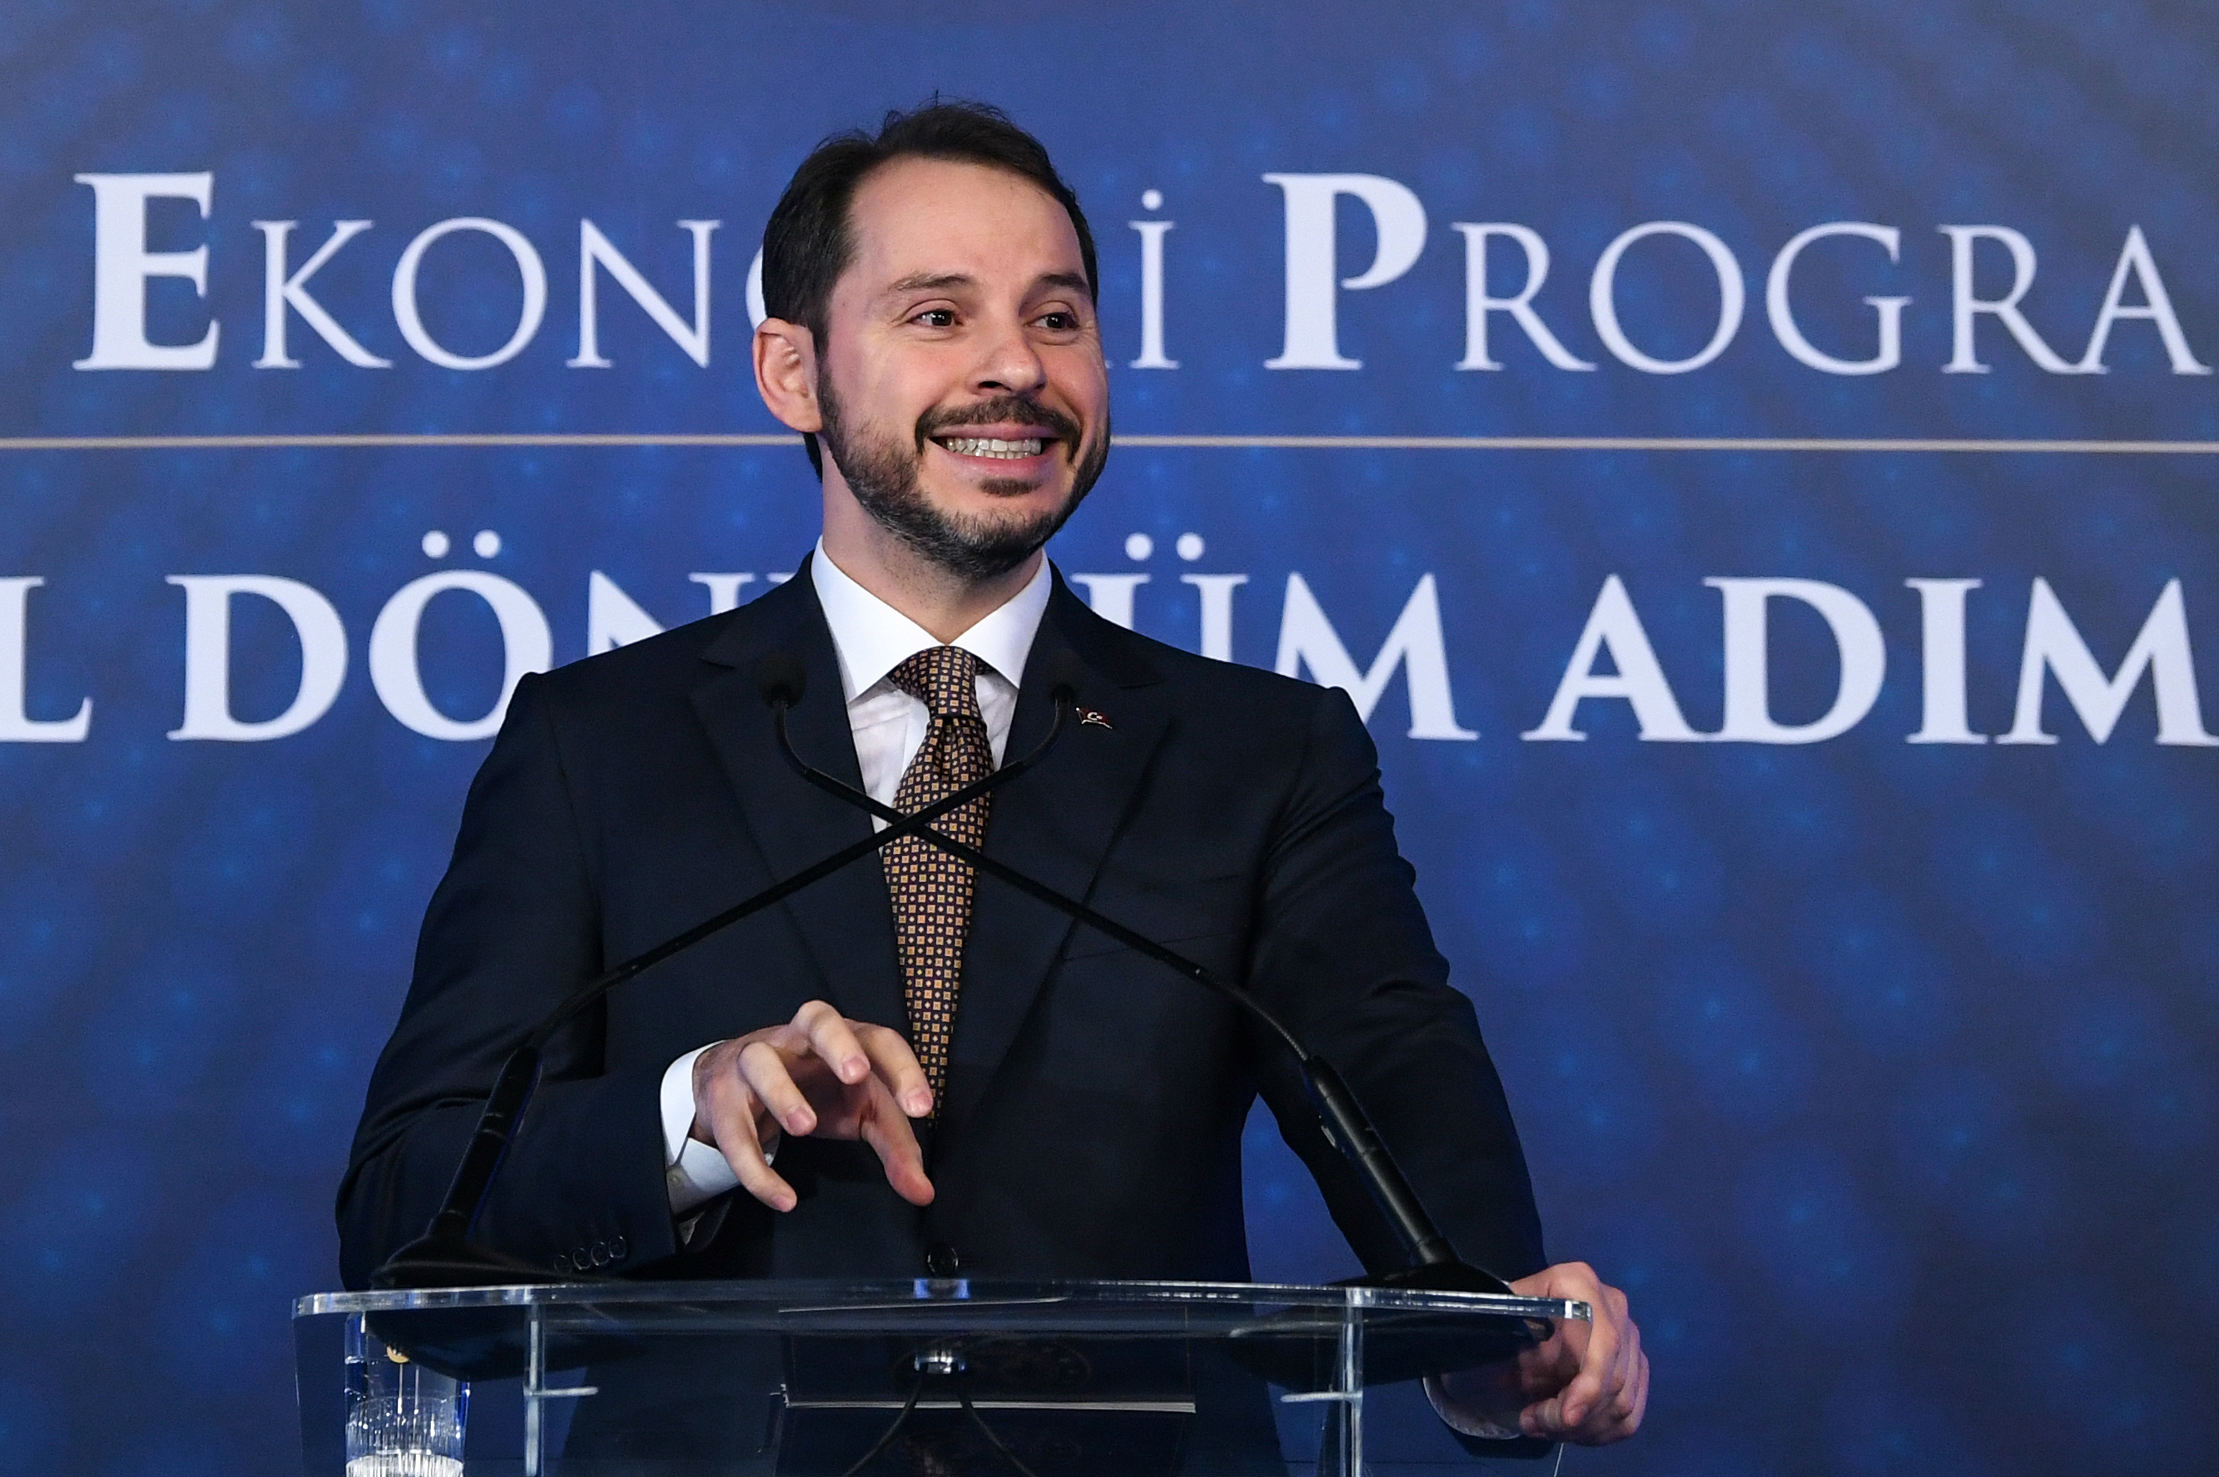 Turkish Treasury and Finance Minister Berat Albayrak addresses a press conference to announce his new economic policy and reforms in Istanbul on 10 April, 2019 (AFP)